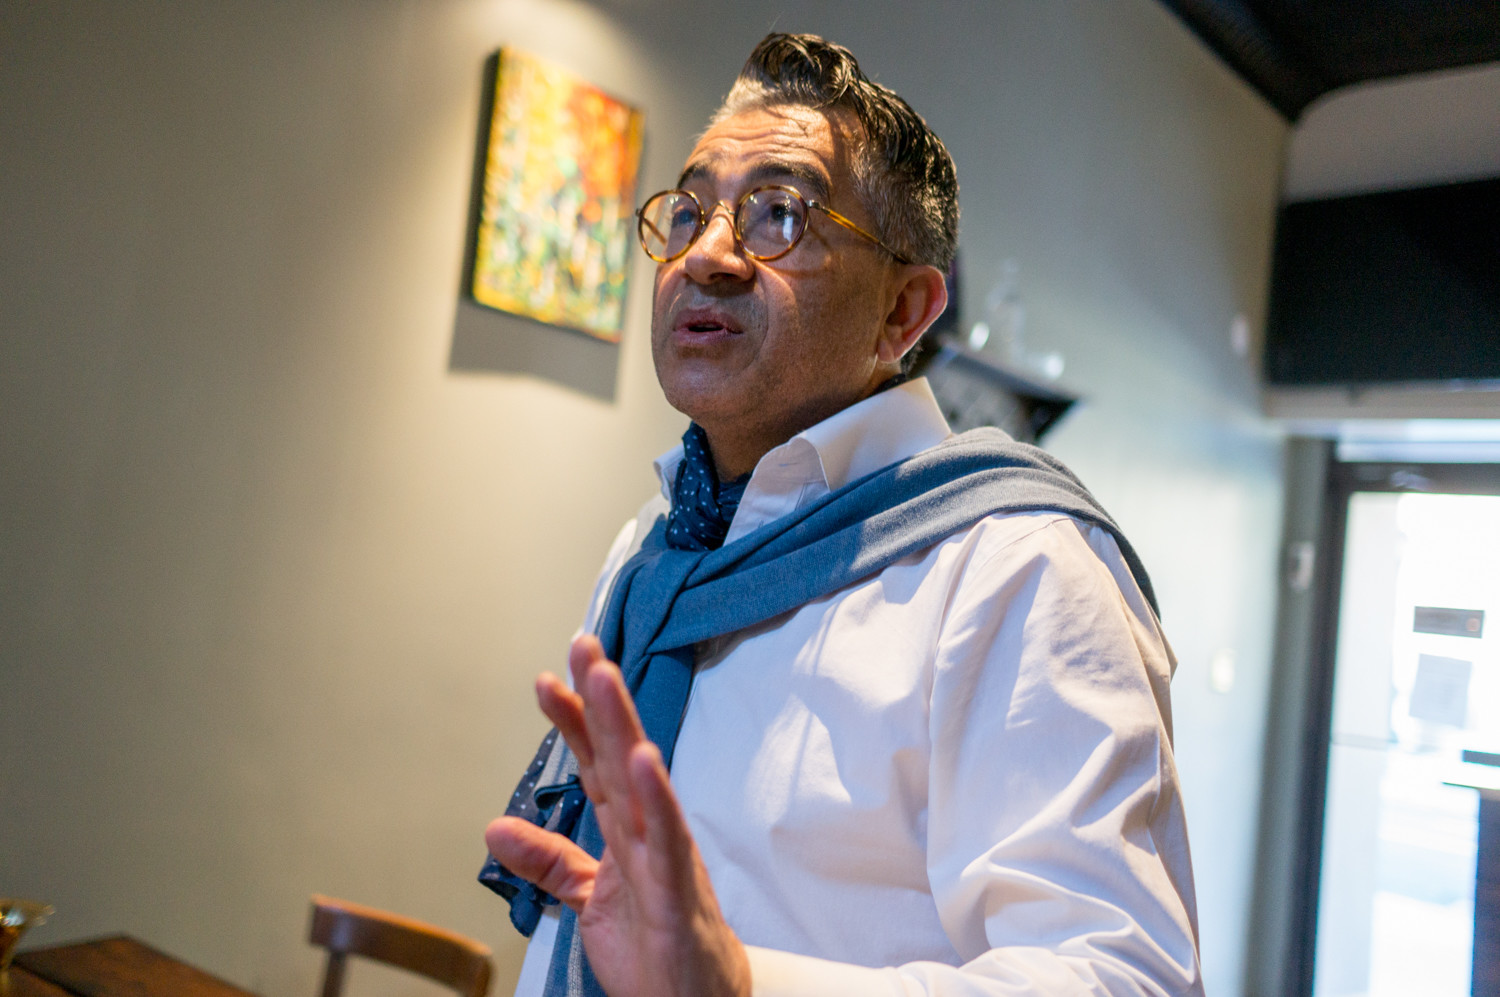 Nando Ghorchian talks about the challenges of running multiple restaurants in the new location for Caffe Buon Gusto.